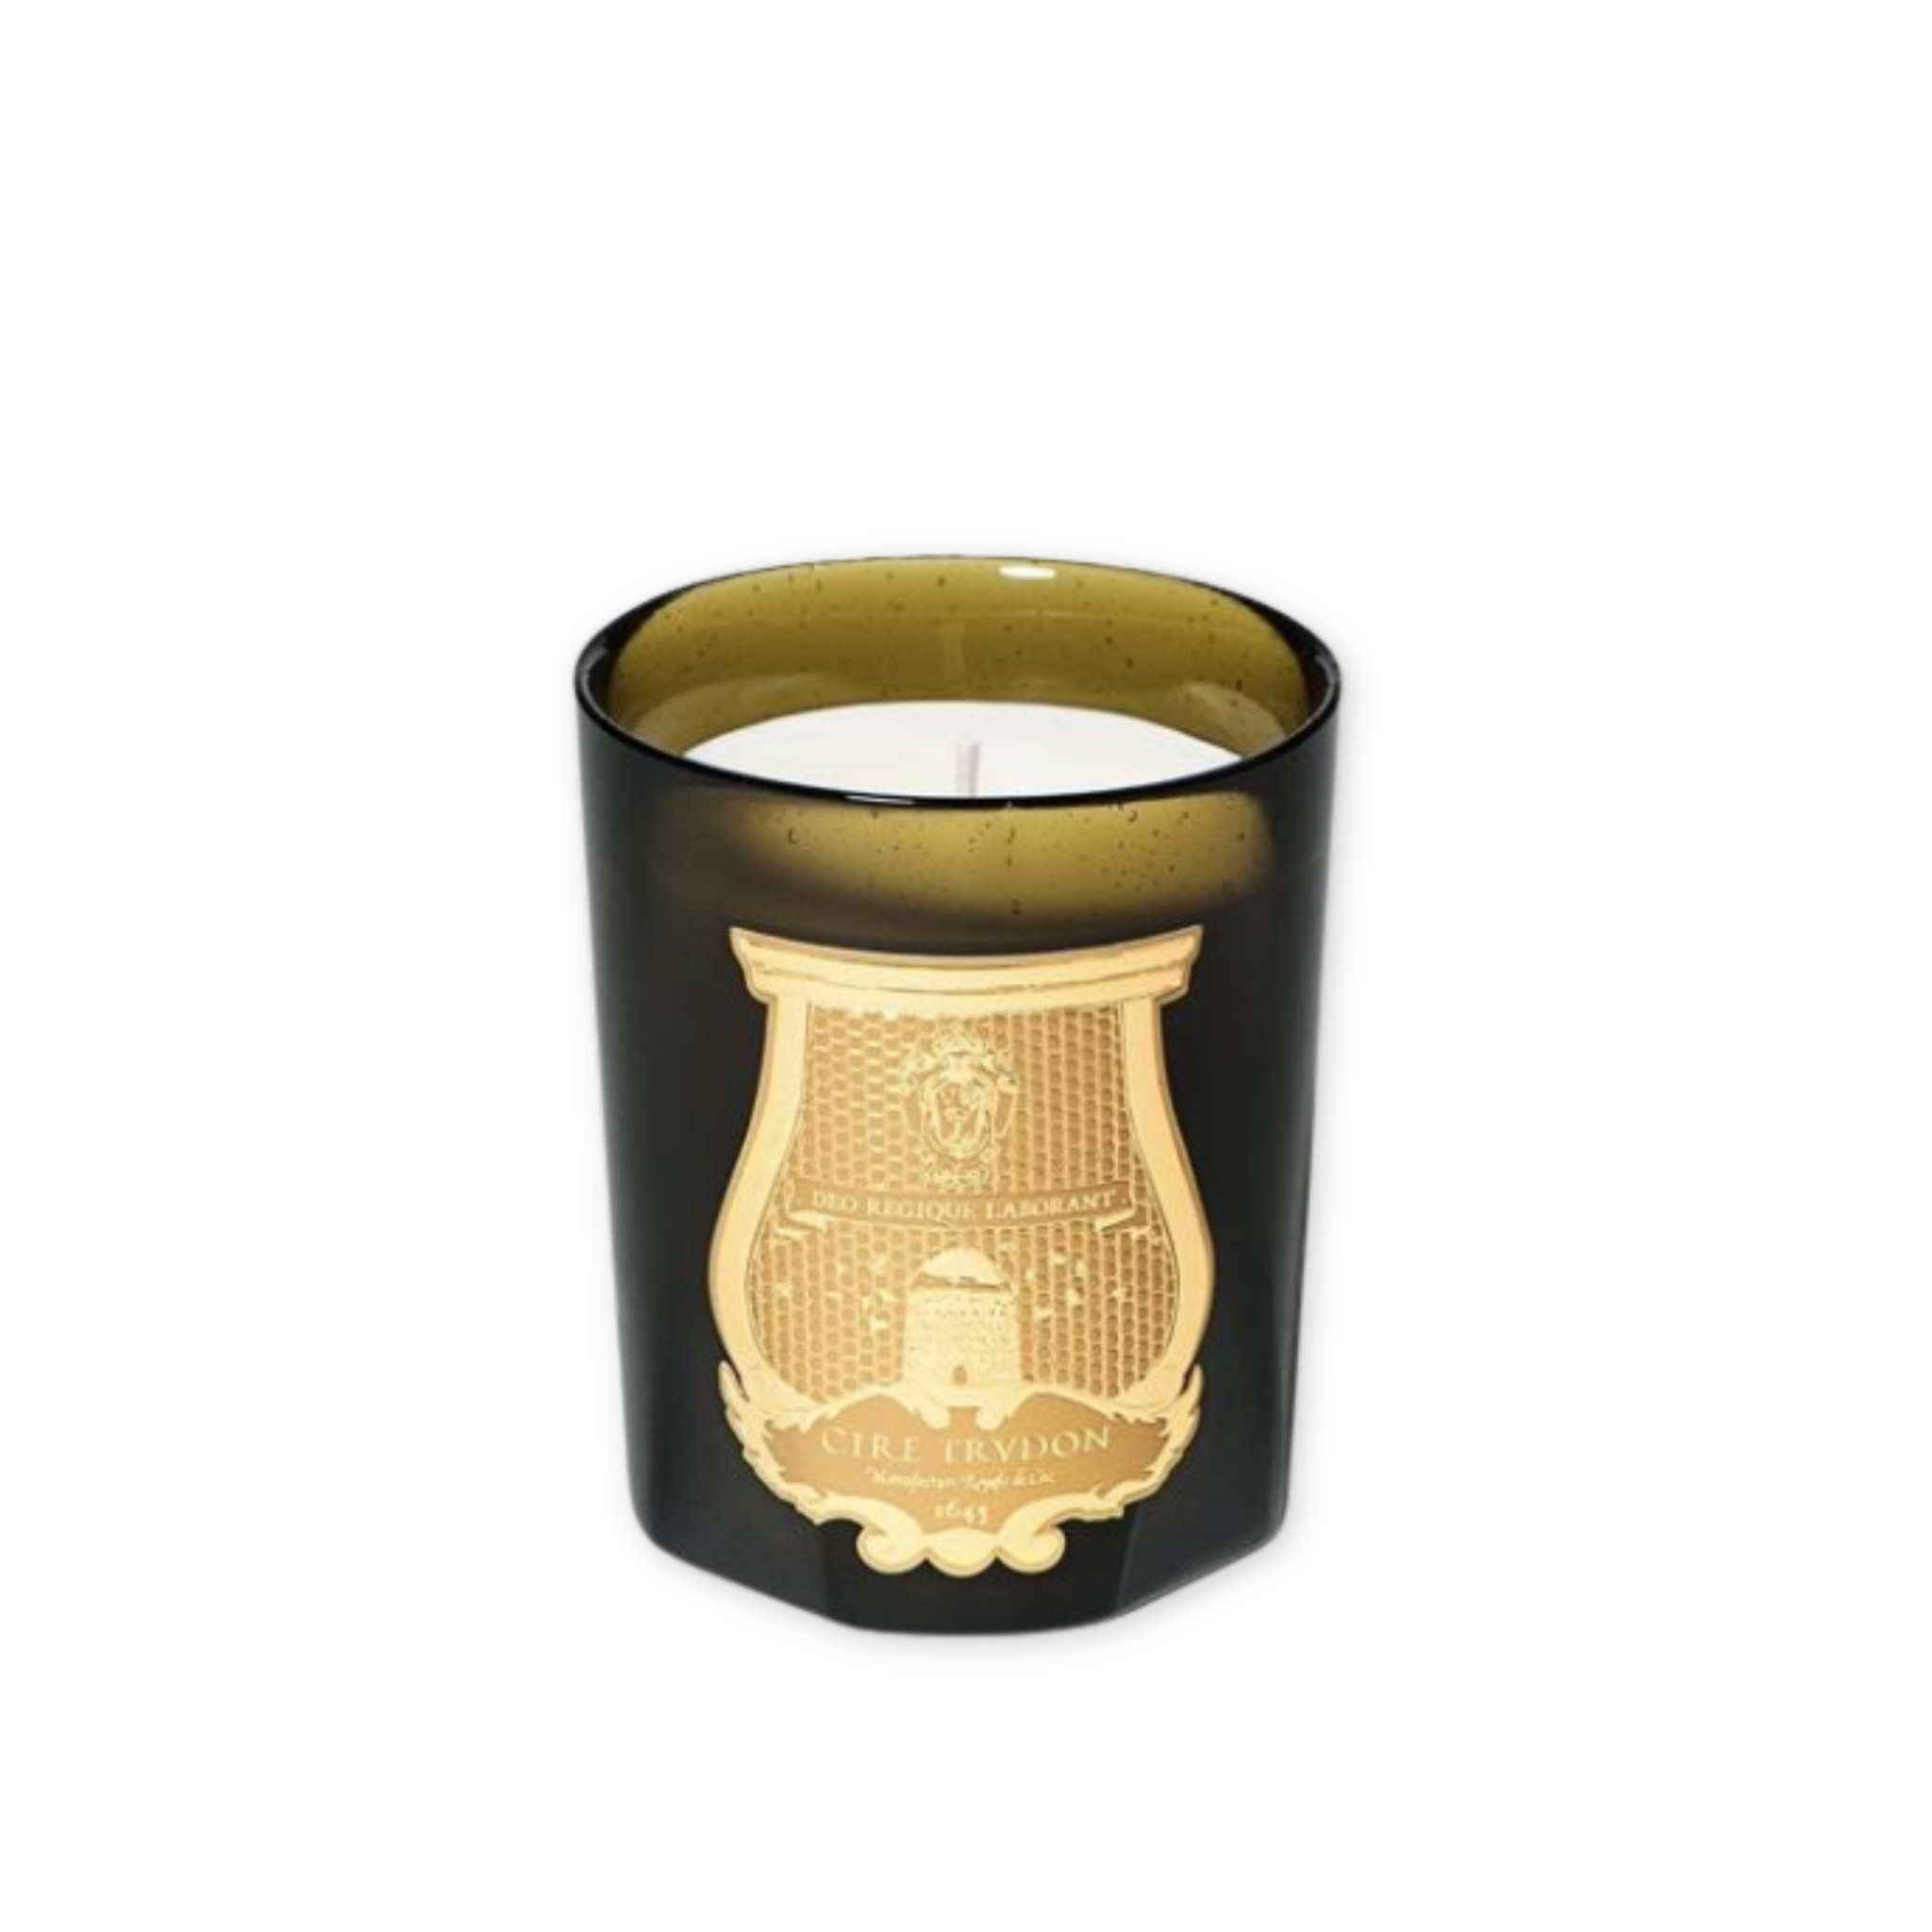 leather and tobacco scented candle